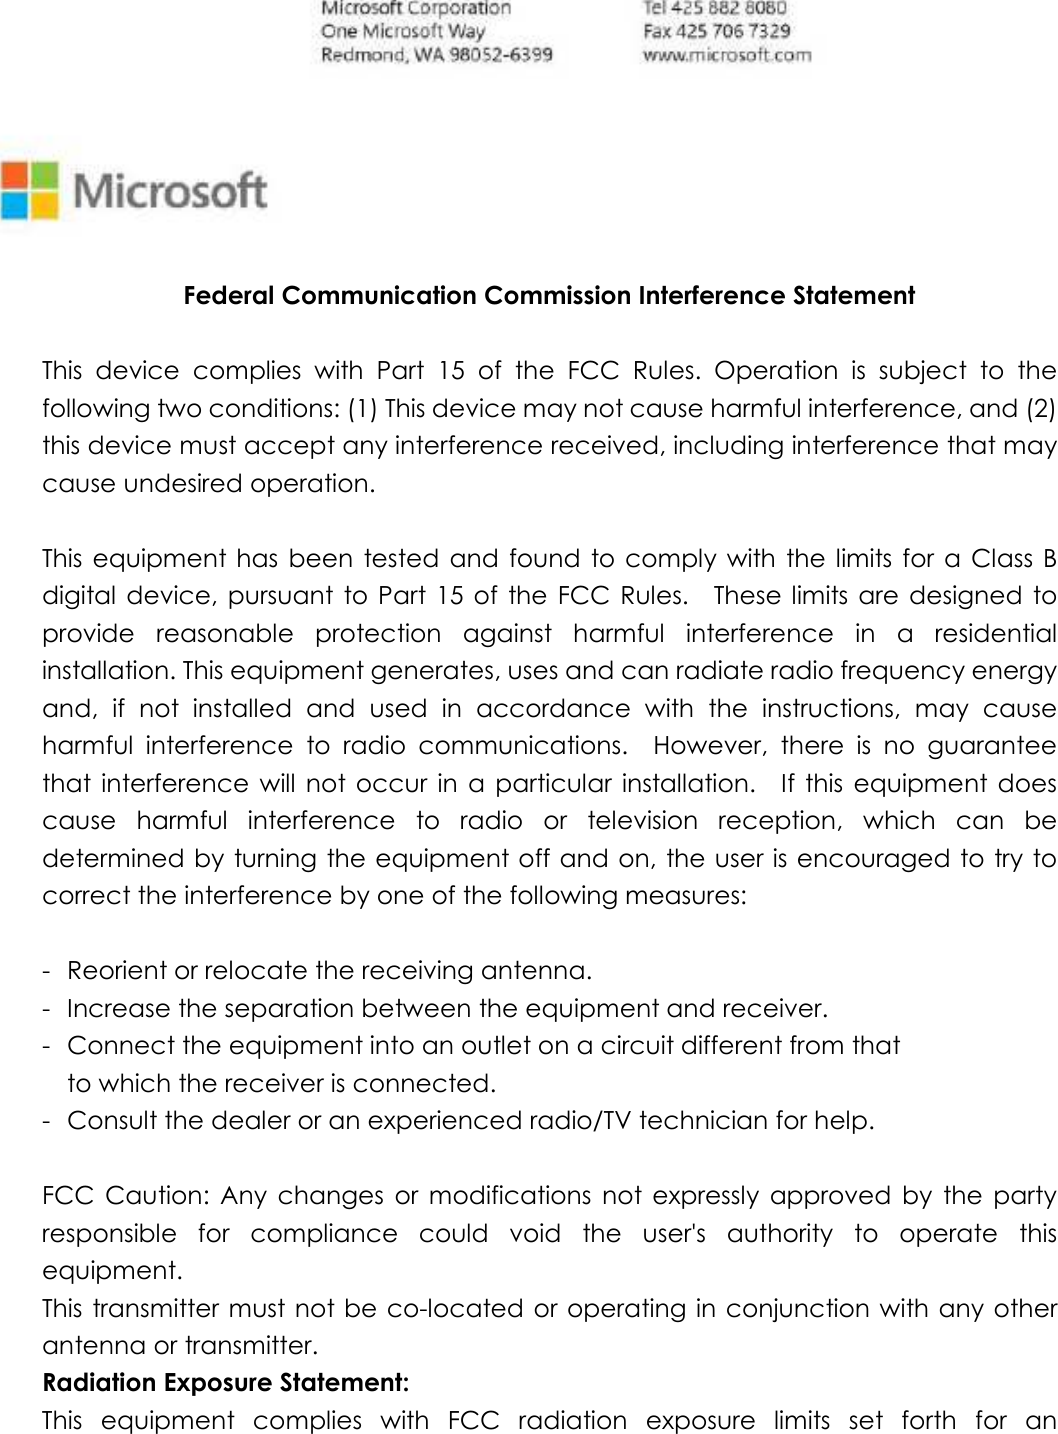  Federal Communication Commission Interference Statement  This  device  complies  with  Part  15  of  the  FCC  Rules.  Operation  is  subject  to  the following two conditions: (1) This device may not cause harmful interference, and (2) this device must accept any interference received, including interference that may cause undesired operation.  This equipment has  been  tested and found  to comply with the limits for a Class B digital  device,  pursuant  to  Part  15  of  the FCC Rules.    These limits  are  designed  to provide  reasonable  protection  against  harmful  interference  in  a  residential installation. This equipment generates, uses and can radiate radio frequency energy and,  if  not  installed  and  used  in  accordance  with  the  instructions,  may  cause harmful  interference  to  radio  communications.    However,  there  is  no  guarantee that  interference  will  not occur  in  a  particular  installation.    If  this  equipment  does cause  harmful  interference  to  radio  or  television  reception,  which  can  be determined by turning the equipment off and on, the user is encouraged to try to correct the interference by one of the following measures:  -  Reorient or relocate the receiving antenna. -  Increase the separation between the equipment and receiver. -  Connect the equipment into an outlet on a circuit different from that to which the receiver is connected. -  Consult the dealer or an experienced radio/TV technician for help.  FCC  Caution:  Any  changes  or  modifications  not  expressly  approved  by  the  party responsible  for  compliance  could  void  the  user&apos;s  authority  to  operate  this equipment. This transmitter must  not be co-located or operating in conjunction with any other antenna or transmitter. Radiation Exposure Statement: This  equipment  complies  with  FCC  radiation  exposure  limits  set  forth  for  an 